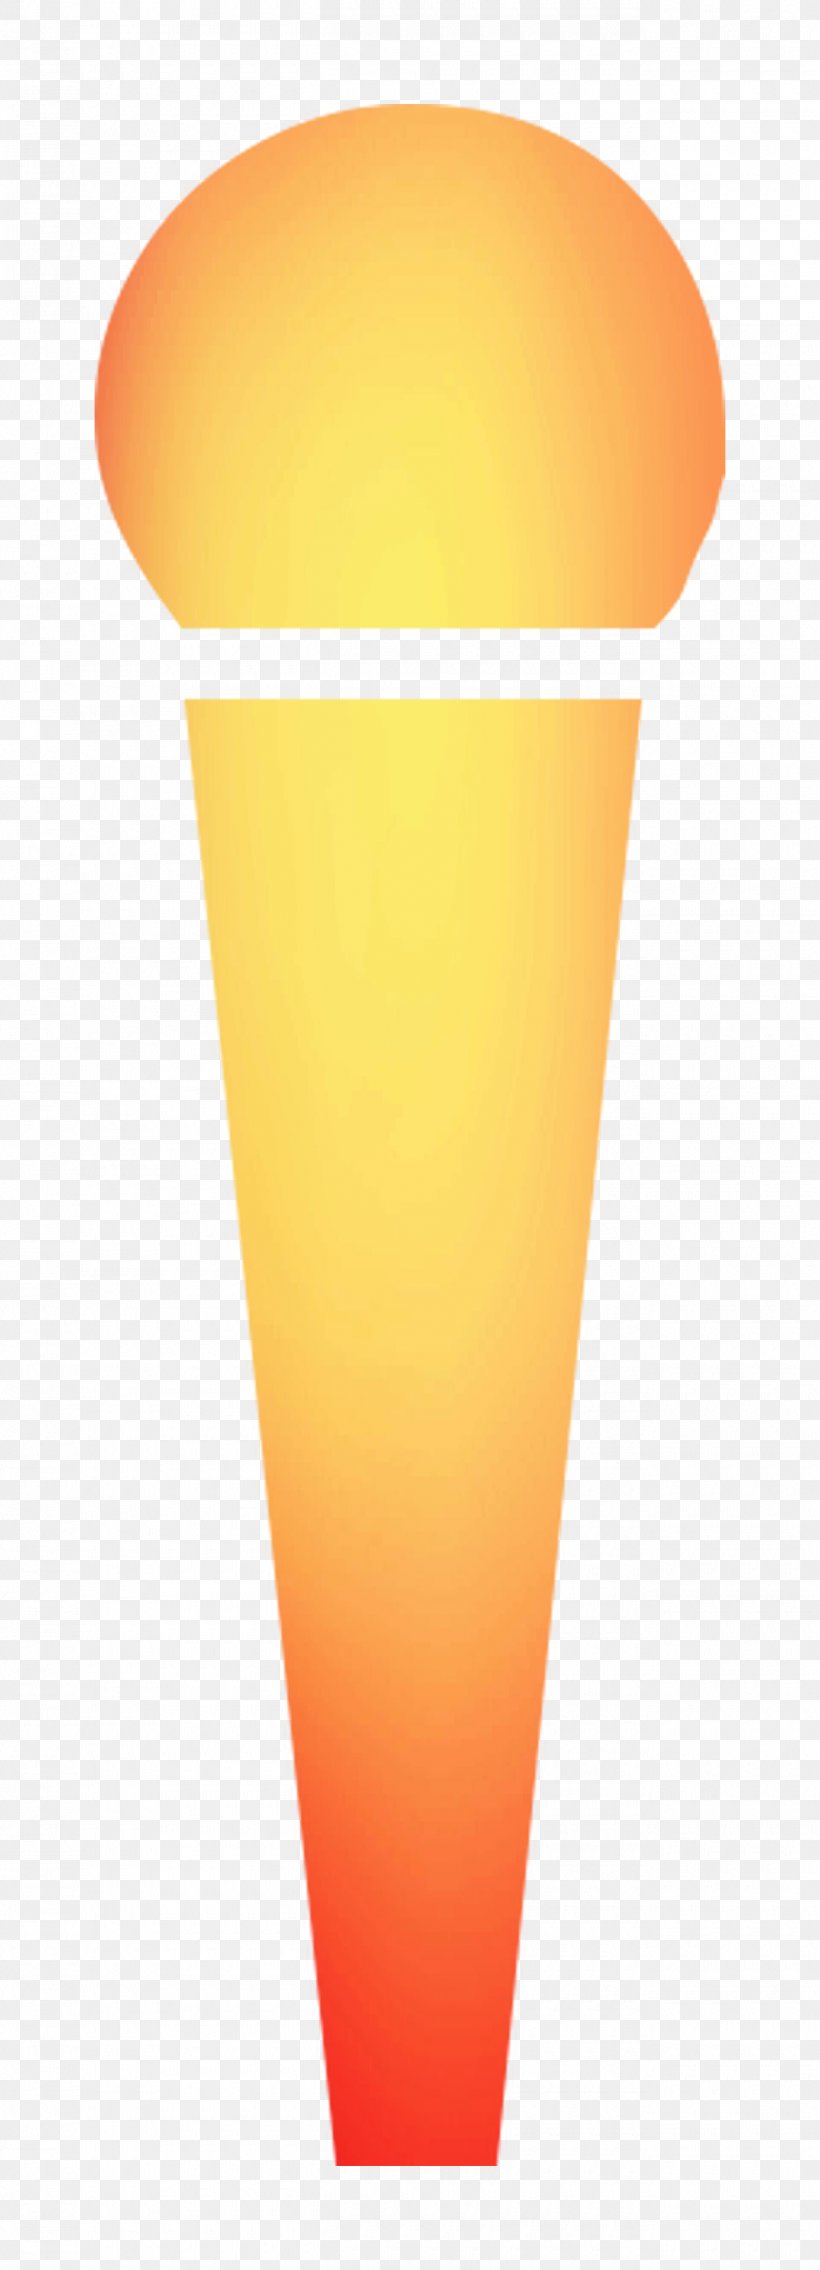 Product Design Angle, PNG, 1300x3600px, Orange, Pint Glass, Yellow Download Free